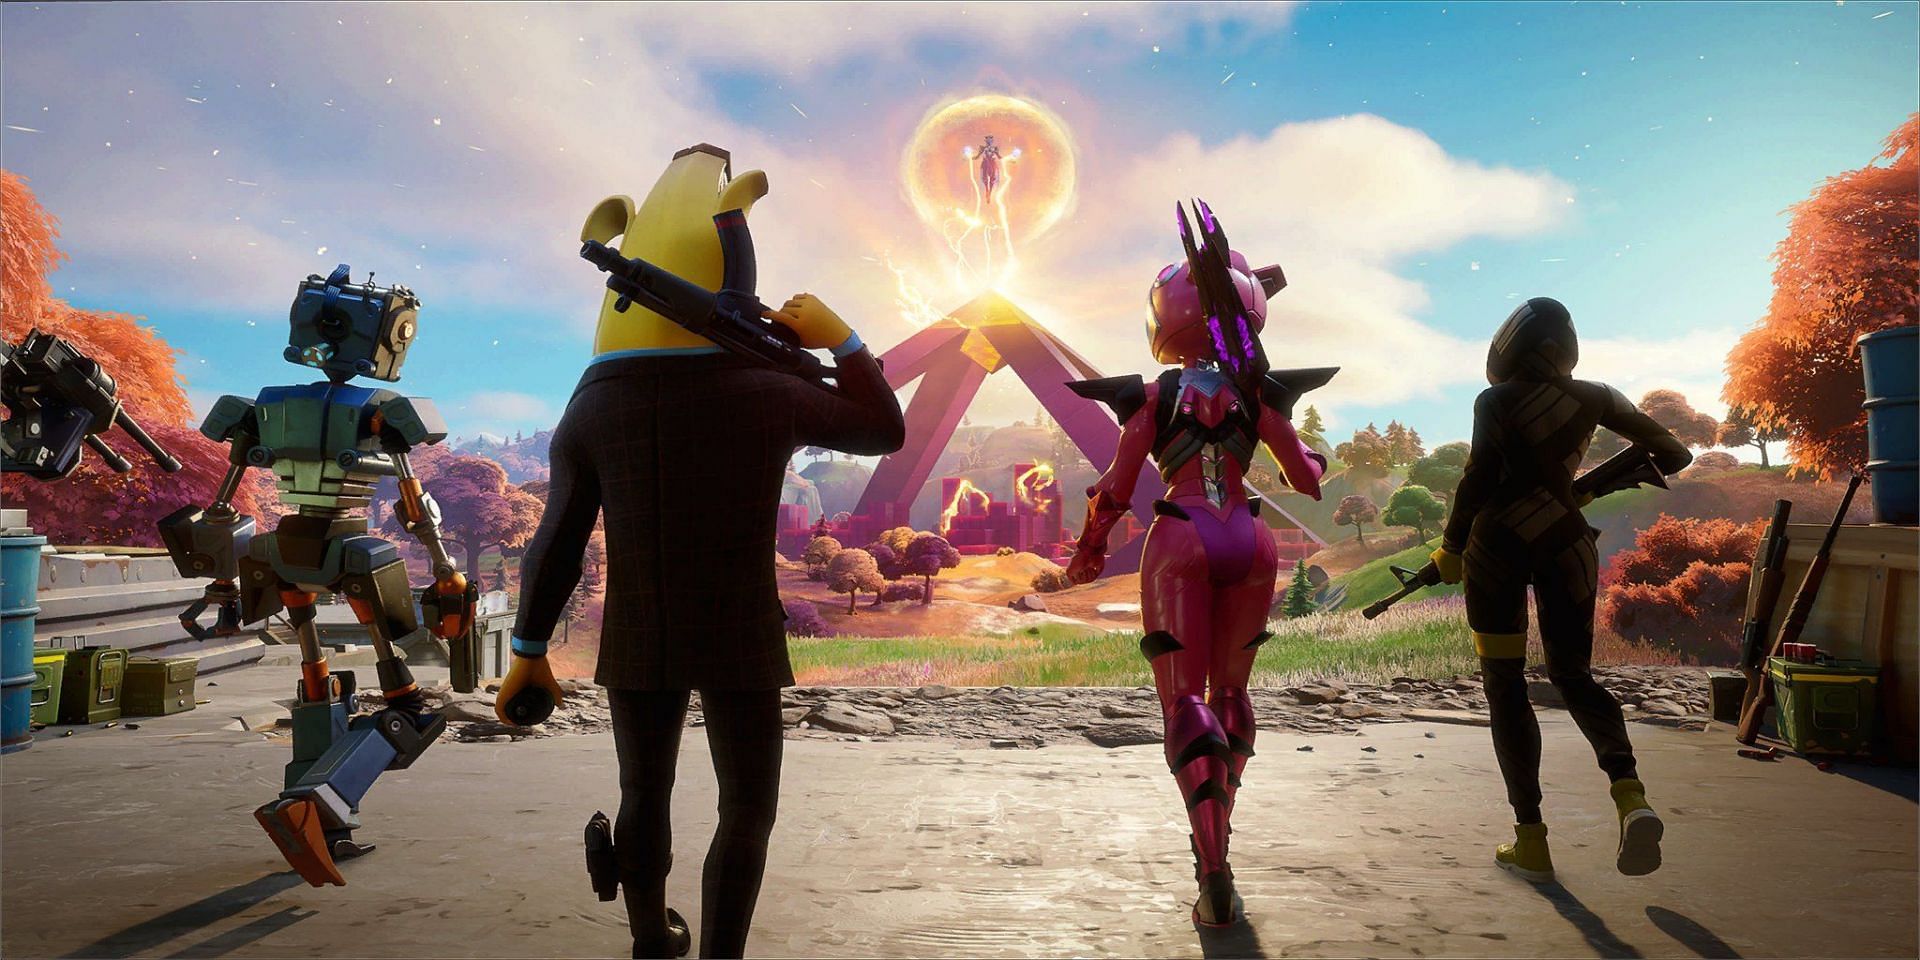 Exclusive live event loading screen that will be given away for free as login rewards in Fortnite Chapter 2 Season 8 (Image via Twitter/ Hypex)